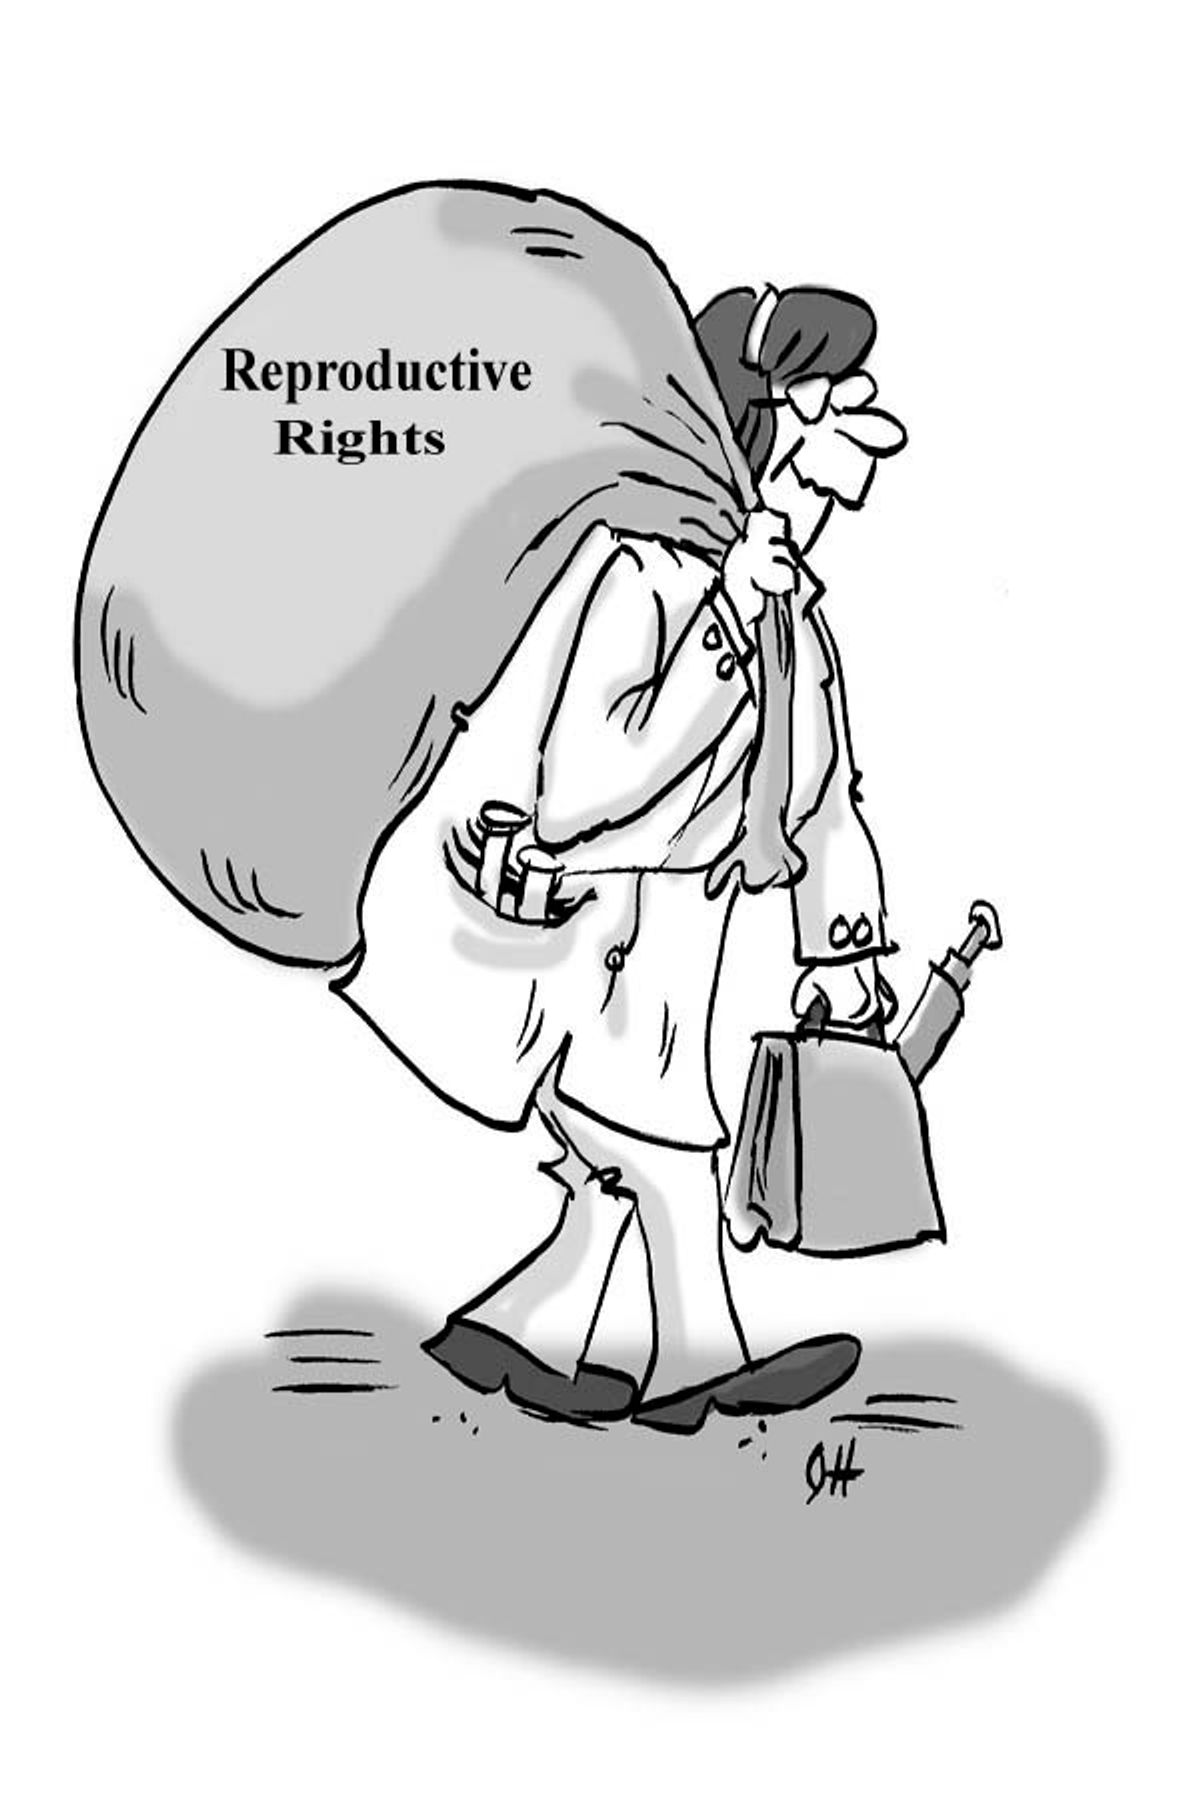 Cartoon of lady walking to work holding giant bag over shoulder carried reproductive rights